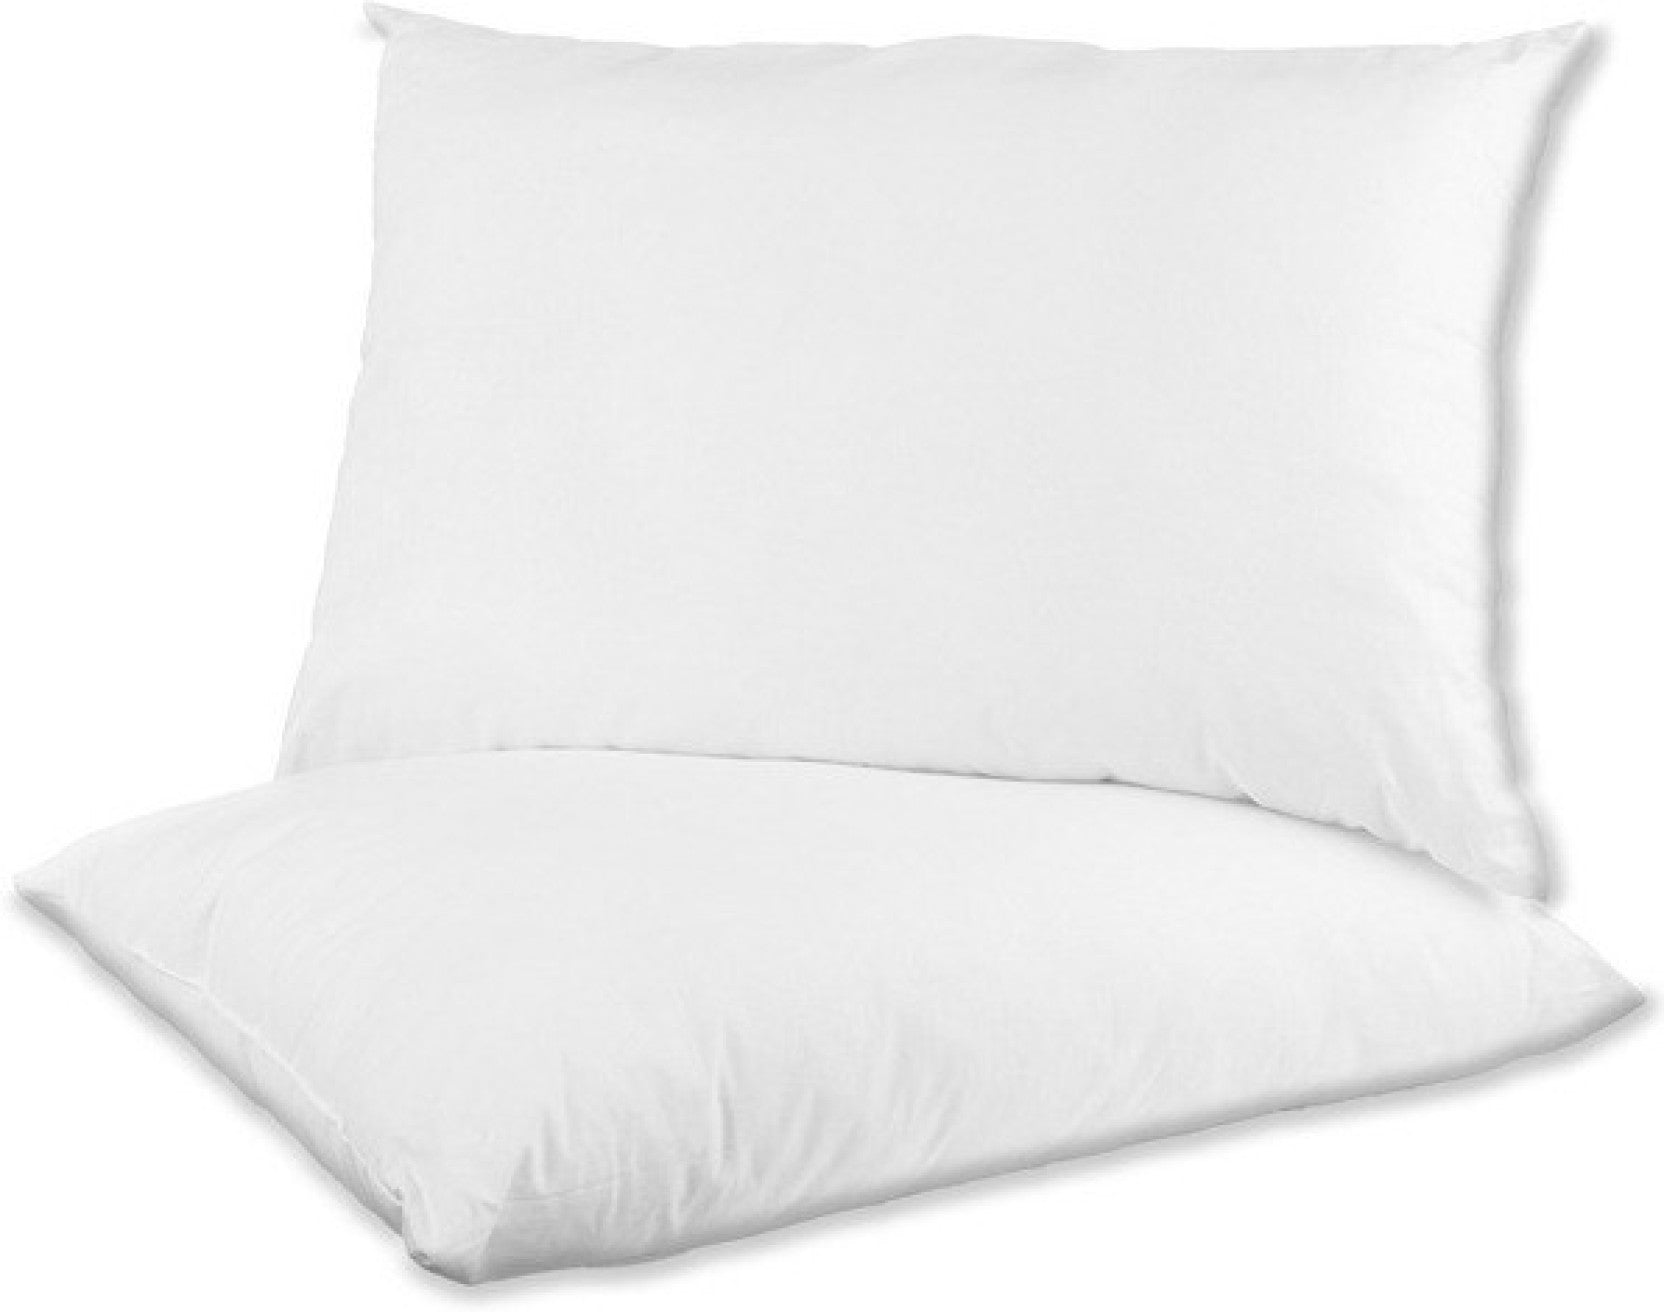 JDX White Pillows for Sleeping 2 Pack with Luxury Hotel Quality, Super Plush Fiber Filling, Top-end Microfiber Cover for Side Stomach Back Sleepers - JDX STORE